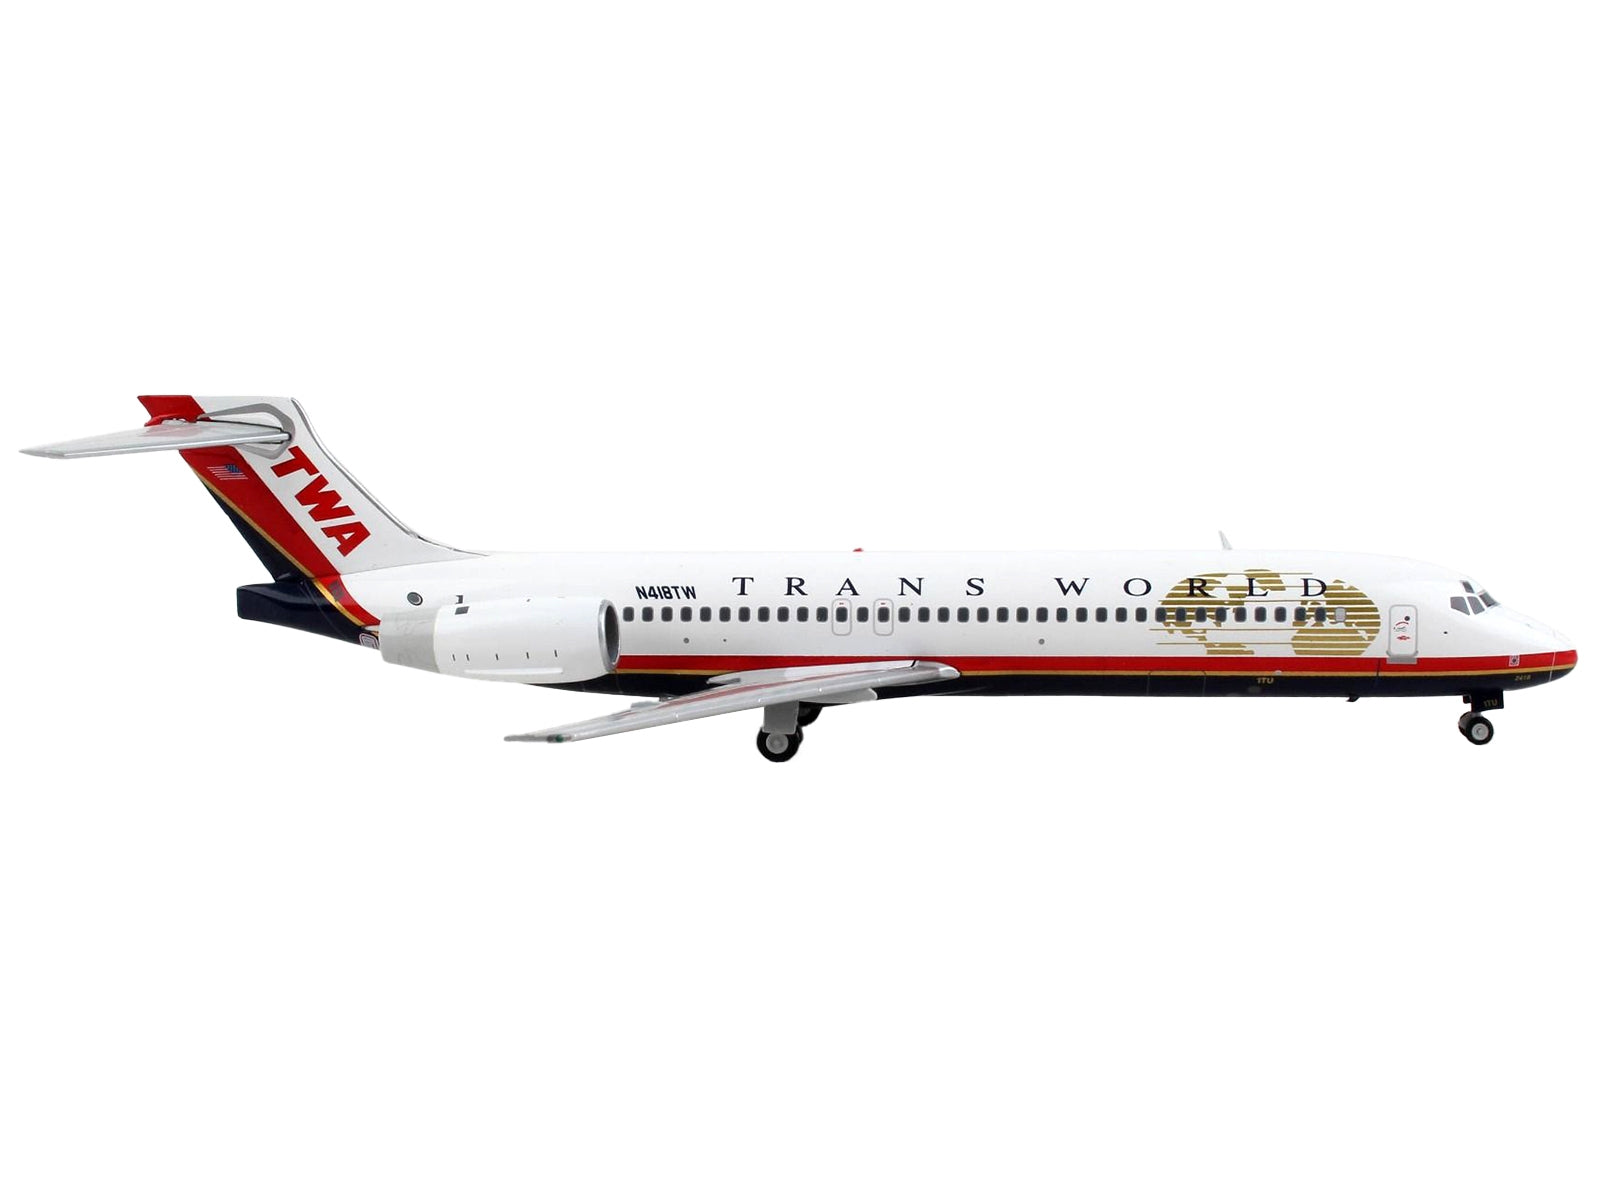 Boeing 717-200 Commercial Aircraft "Trans World Airlines" White with Red Stripes "Gemini 200" Series 1/200 Diecast Model Airplane by GeminiJets